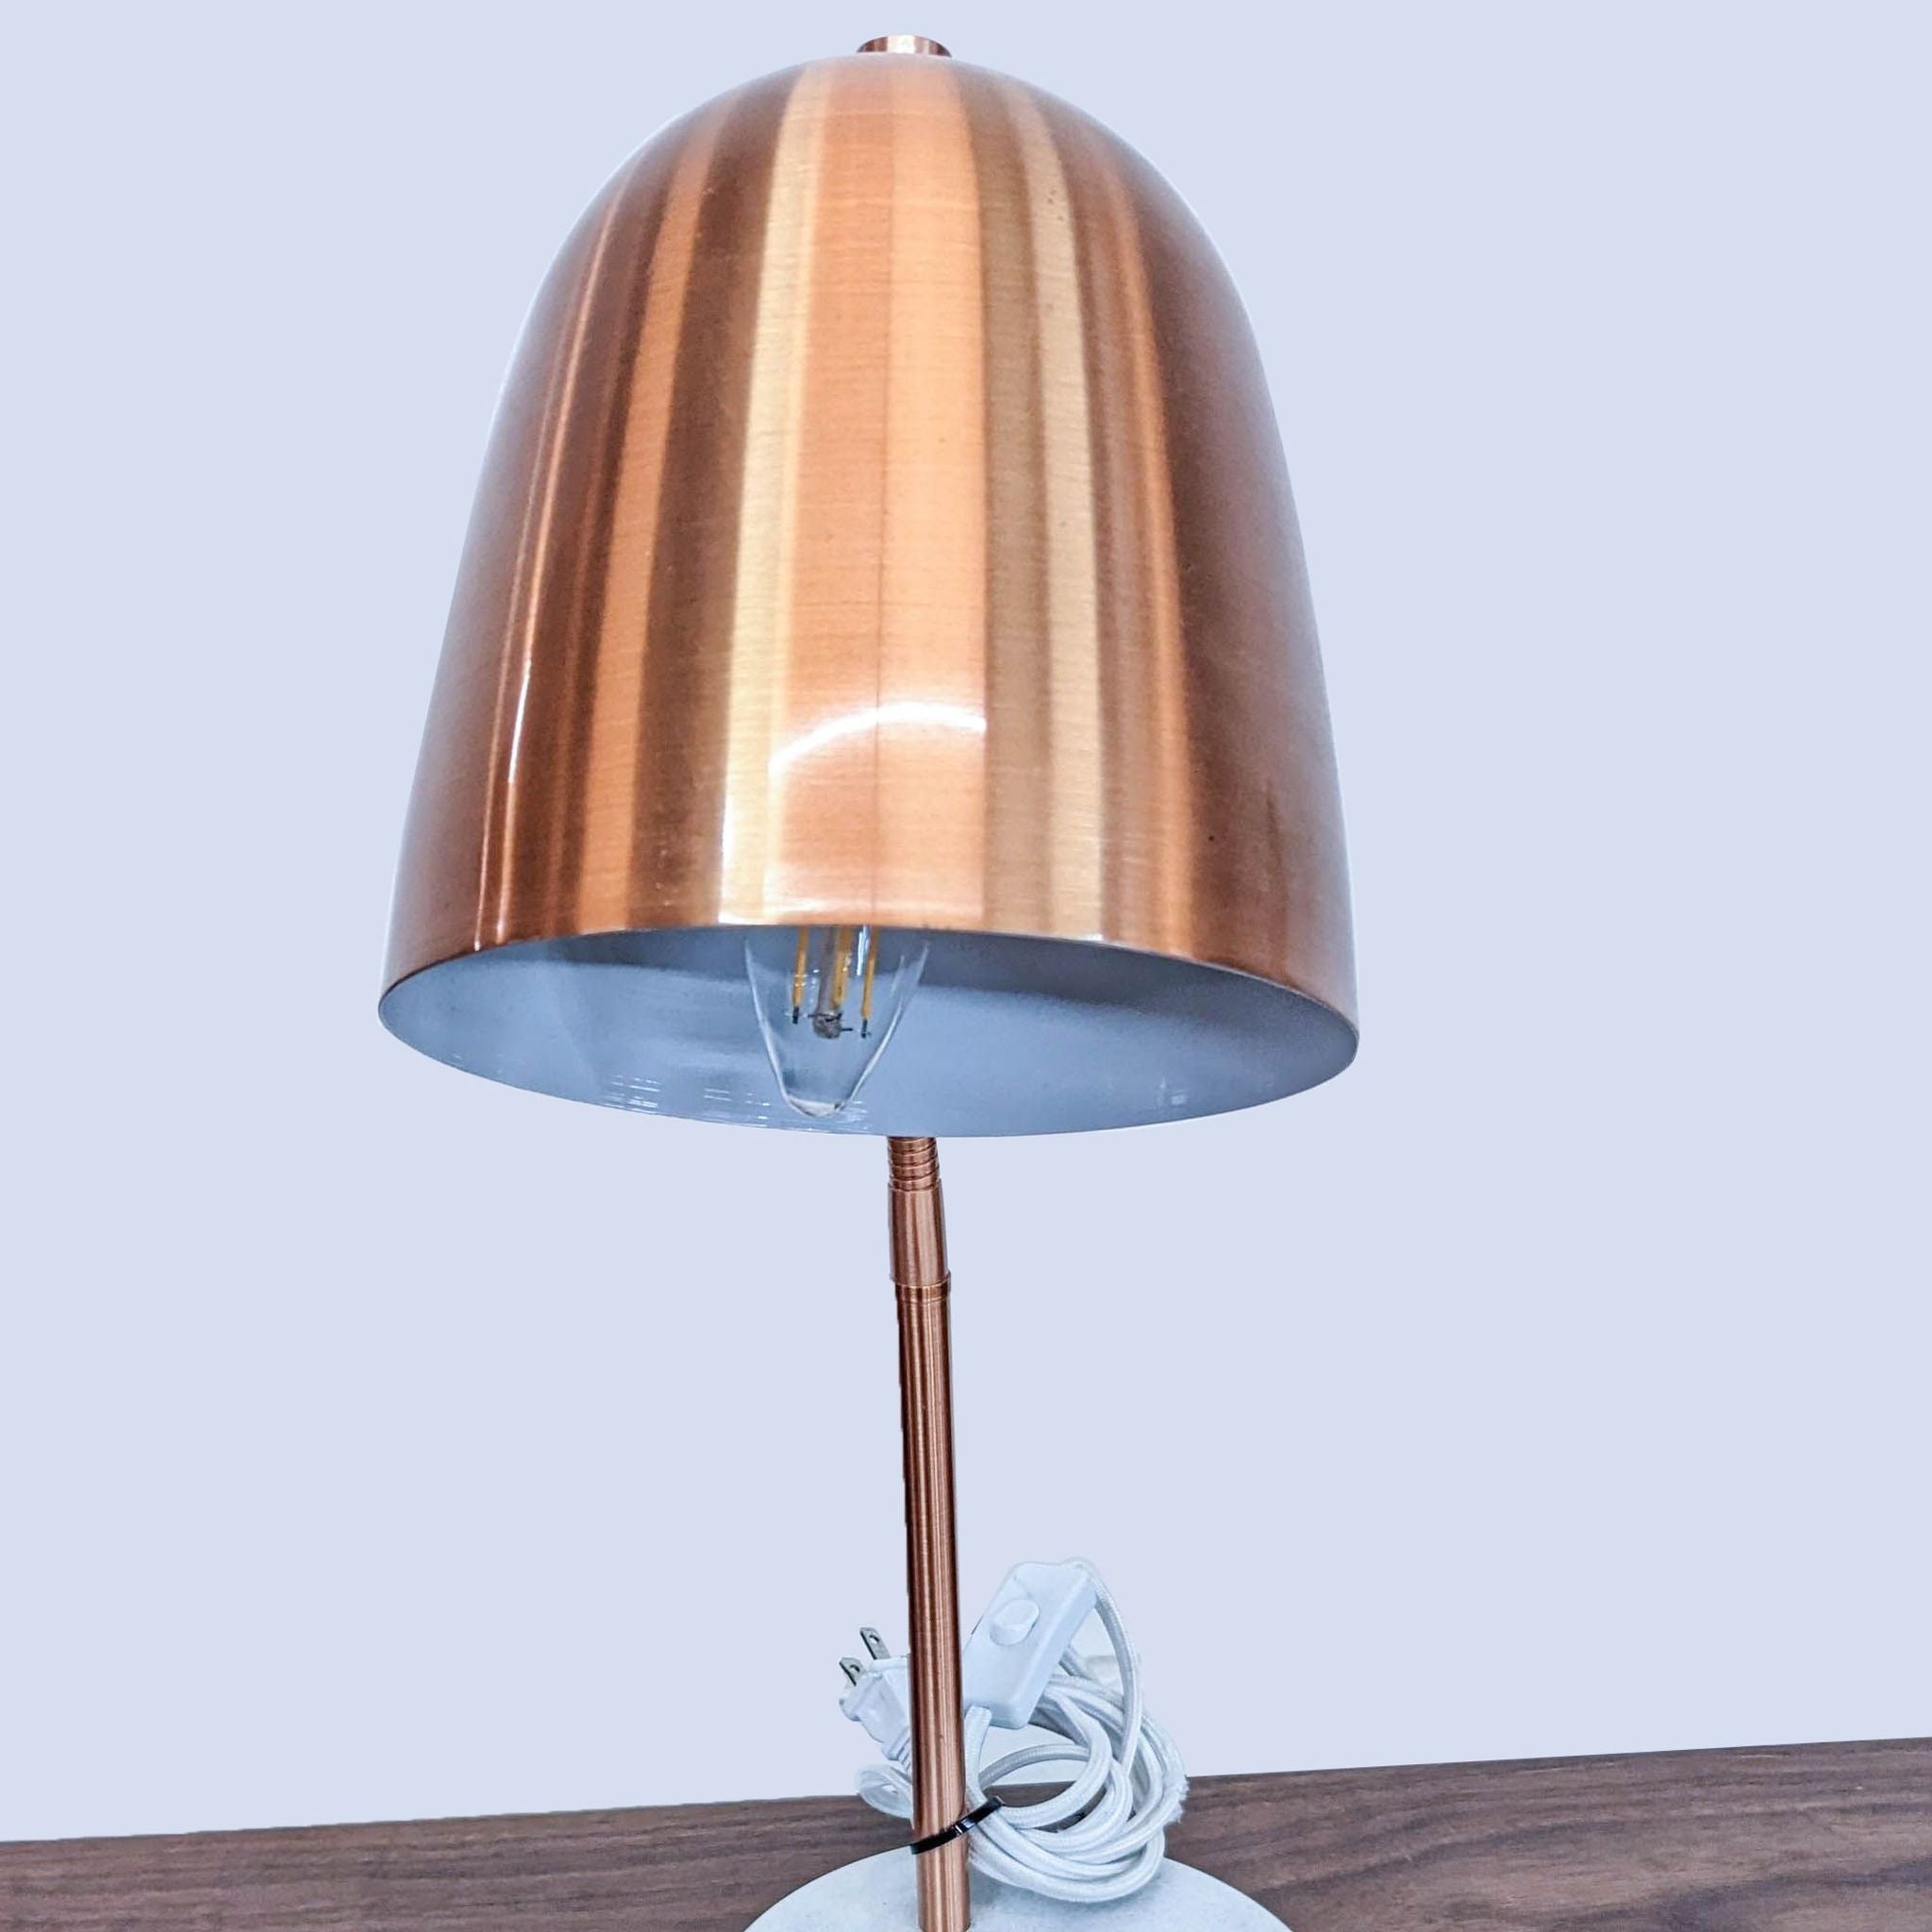 Reperch desk lamp with an arched copper stand and visible bulb, marble base on wood surface.